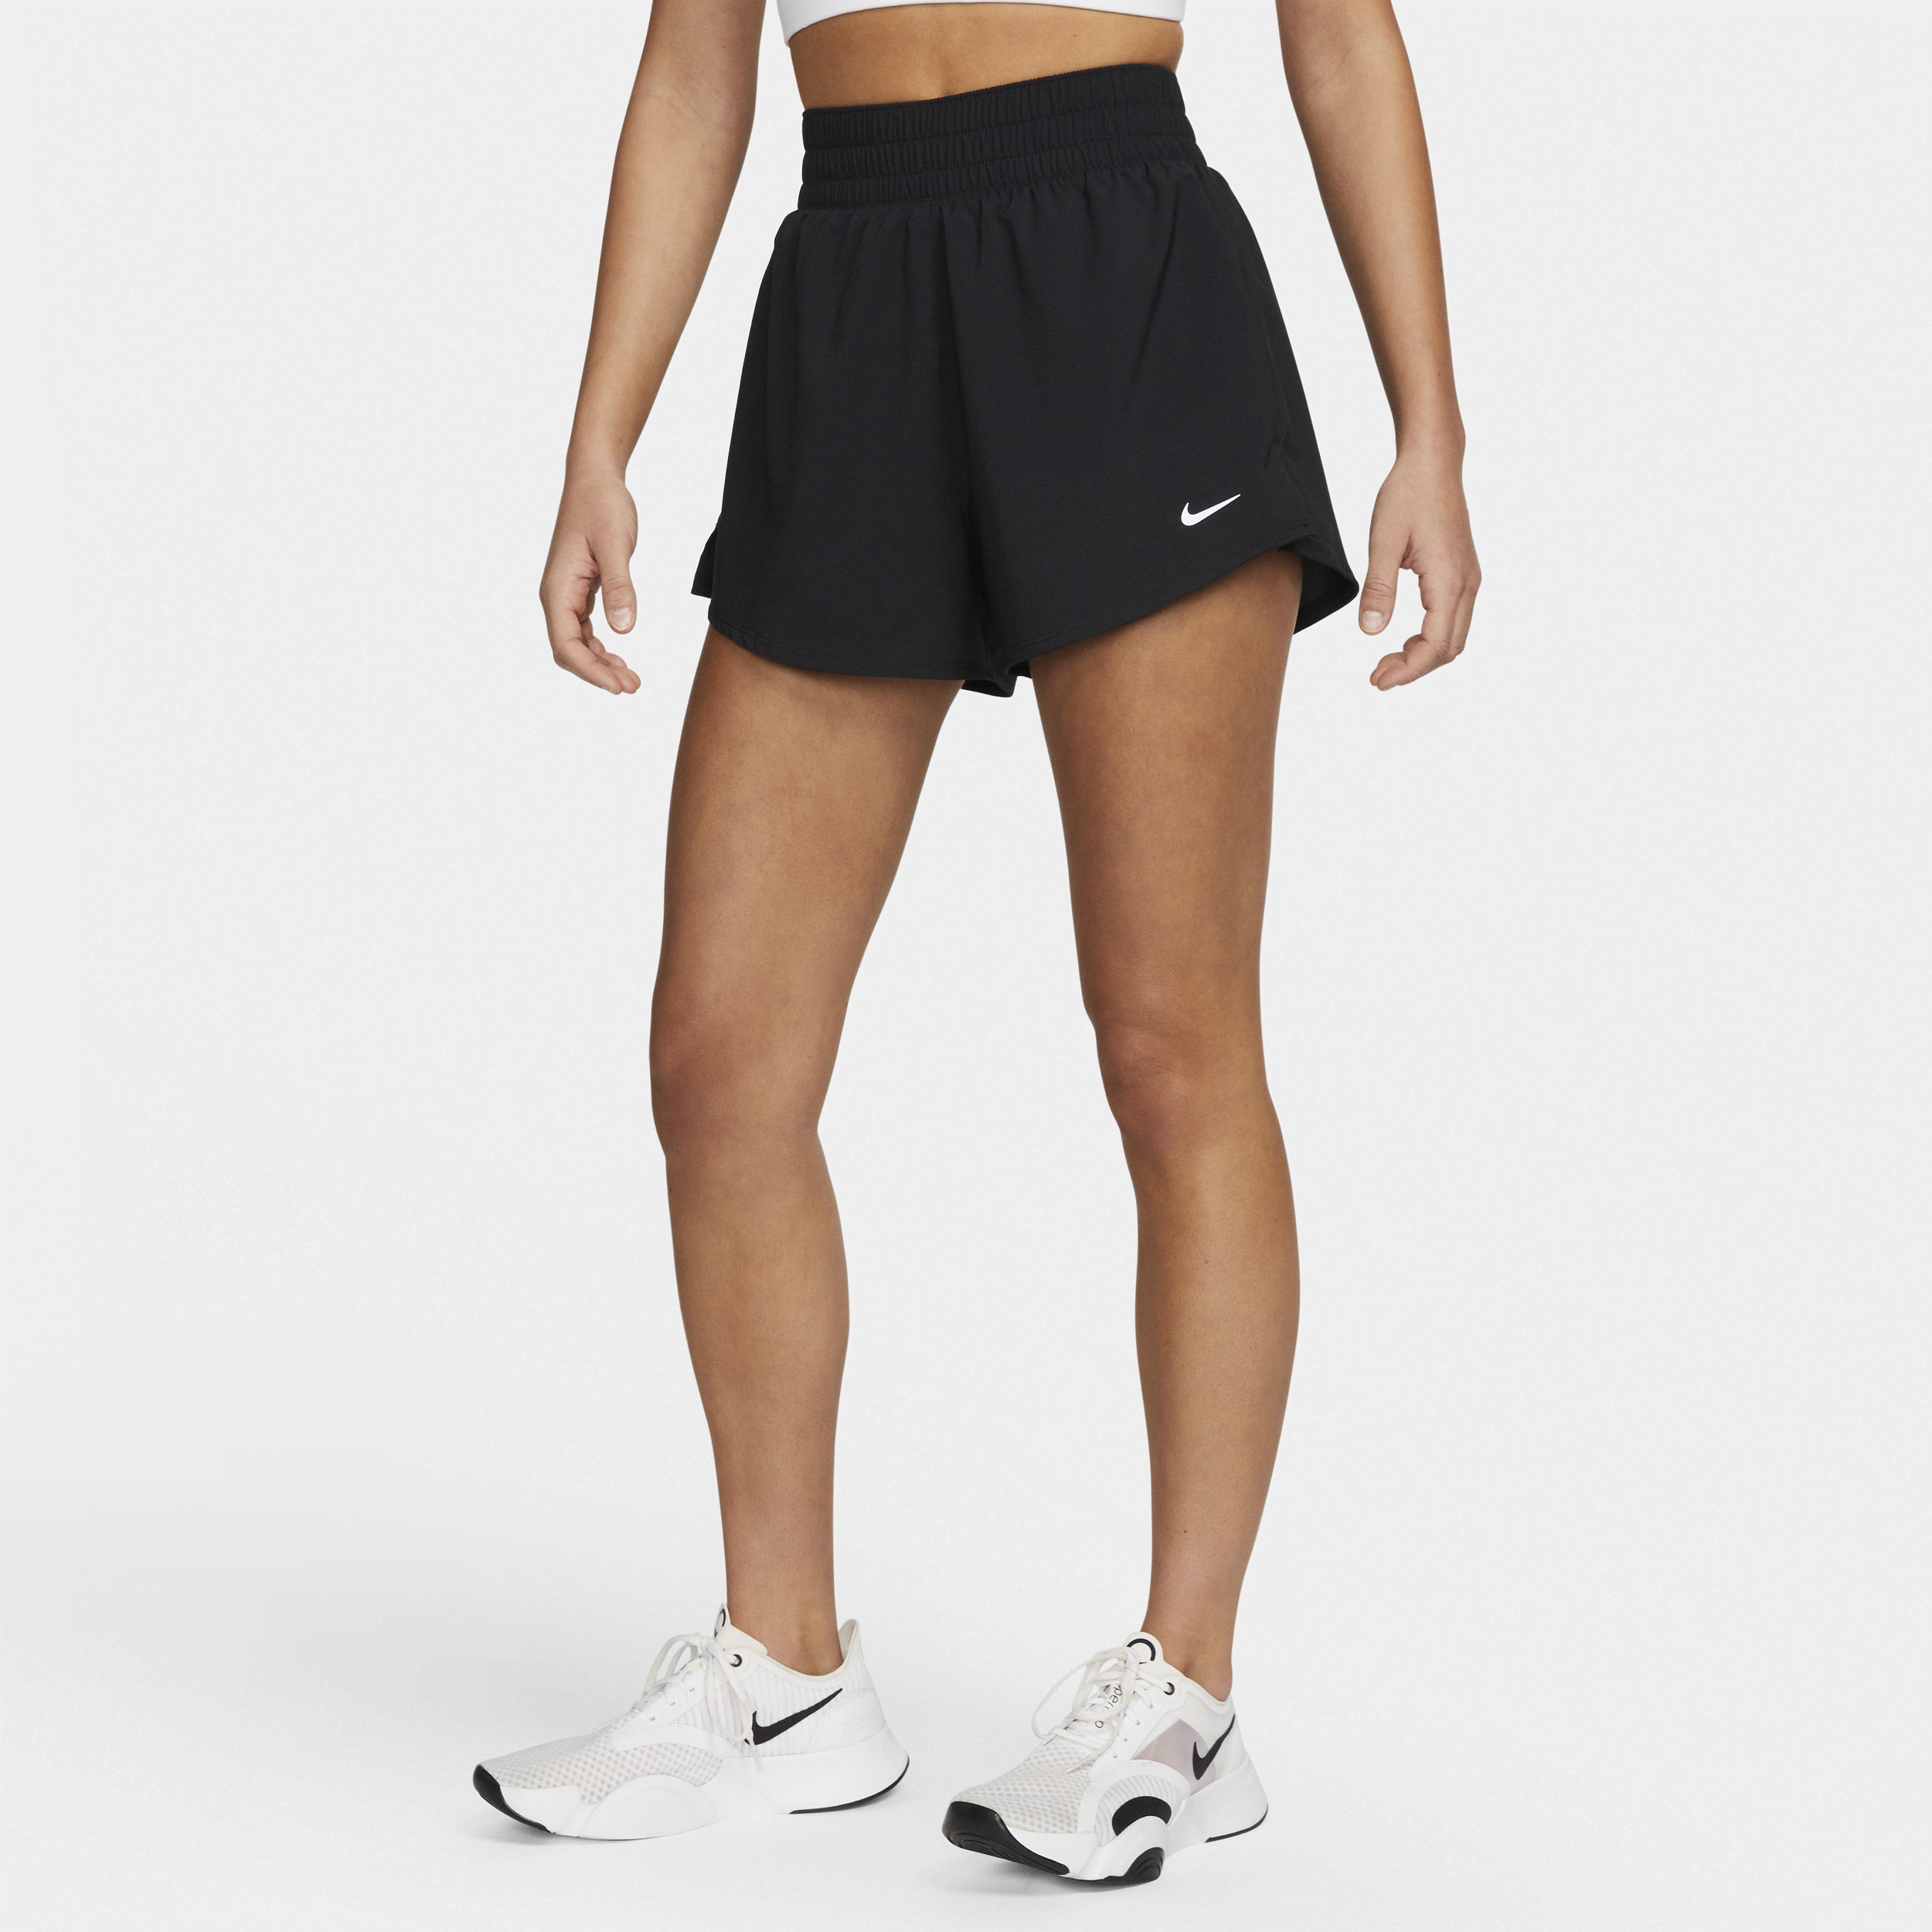 NIKE WOMEN'S ONE DRI-FIT HIGH-WAISTED 3" 2-IN-1 SHORTS,1008061496